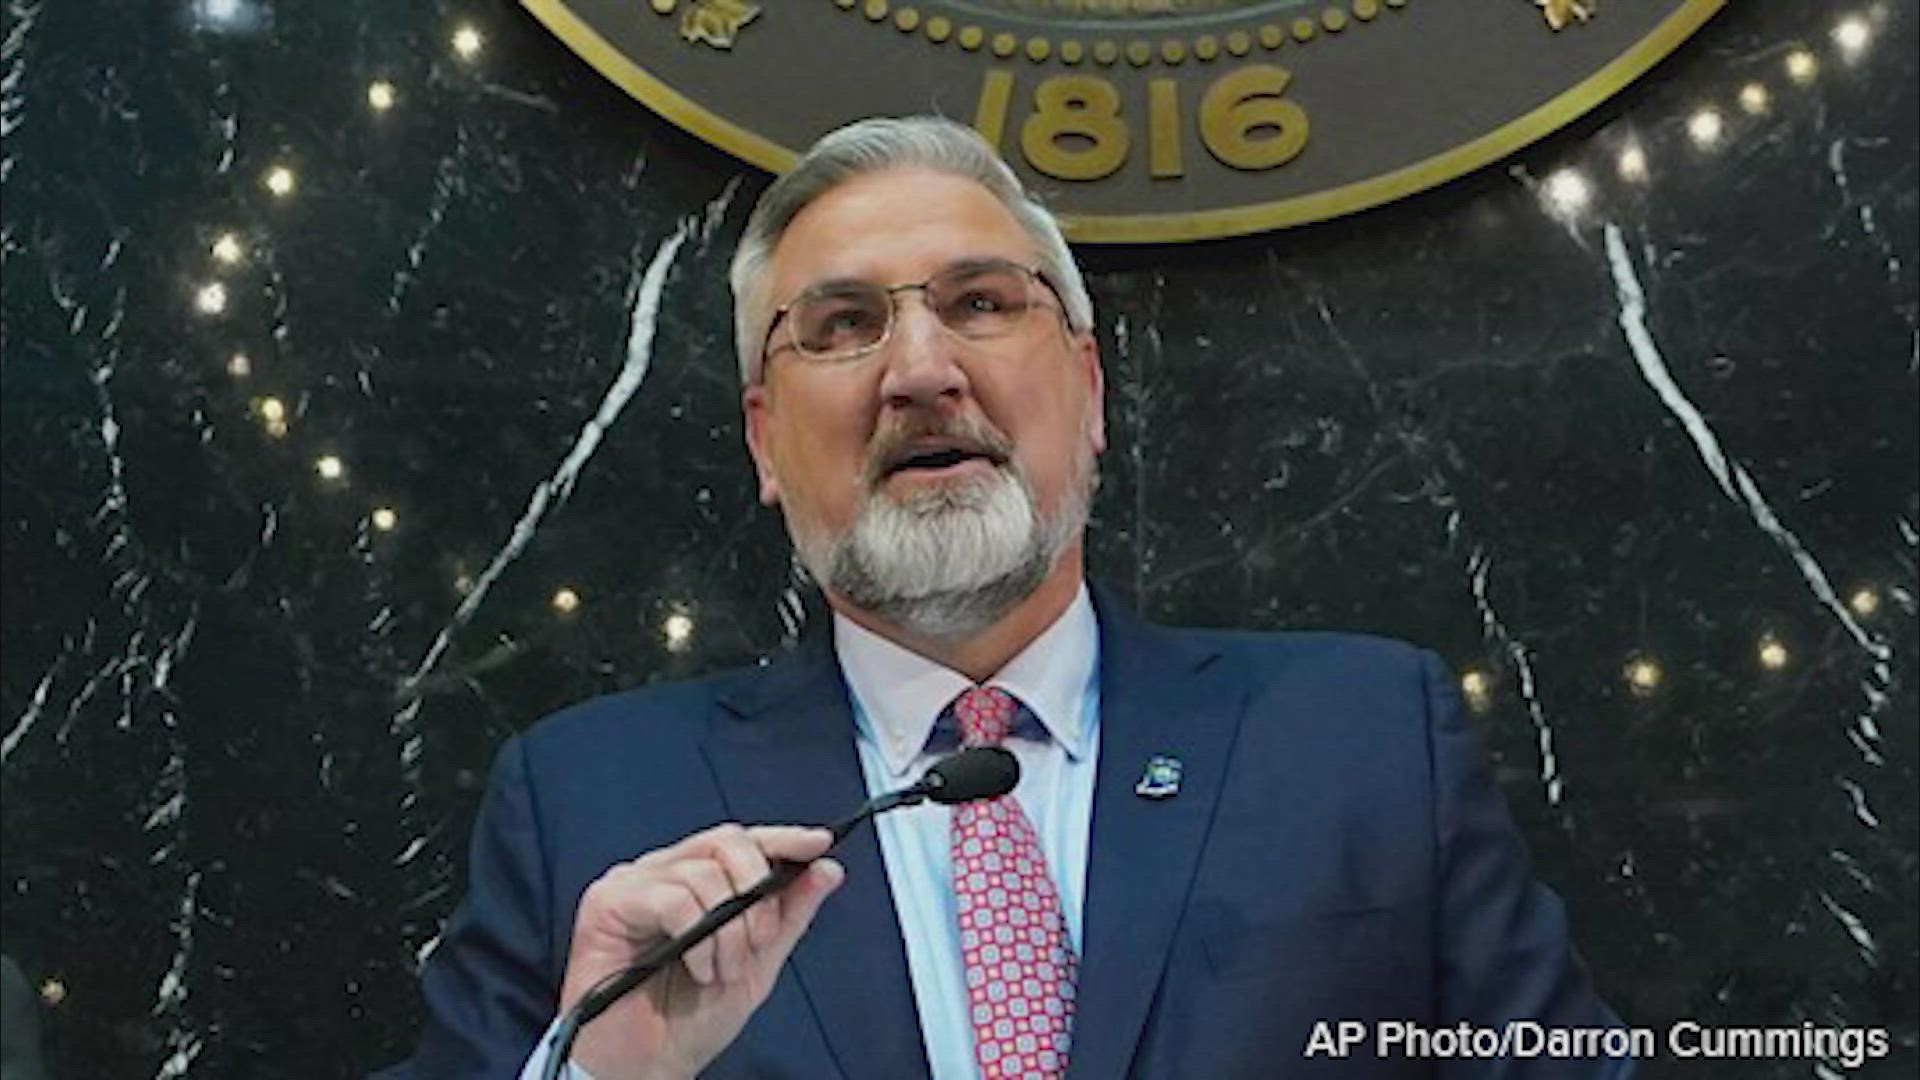 The Indiana General Assembly will meet July 6 about the governor's plan to return $1 billion from the state's surplus.